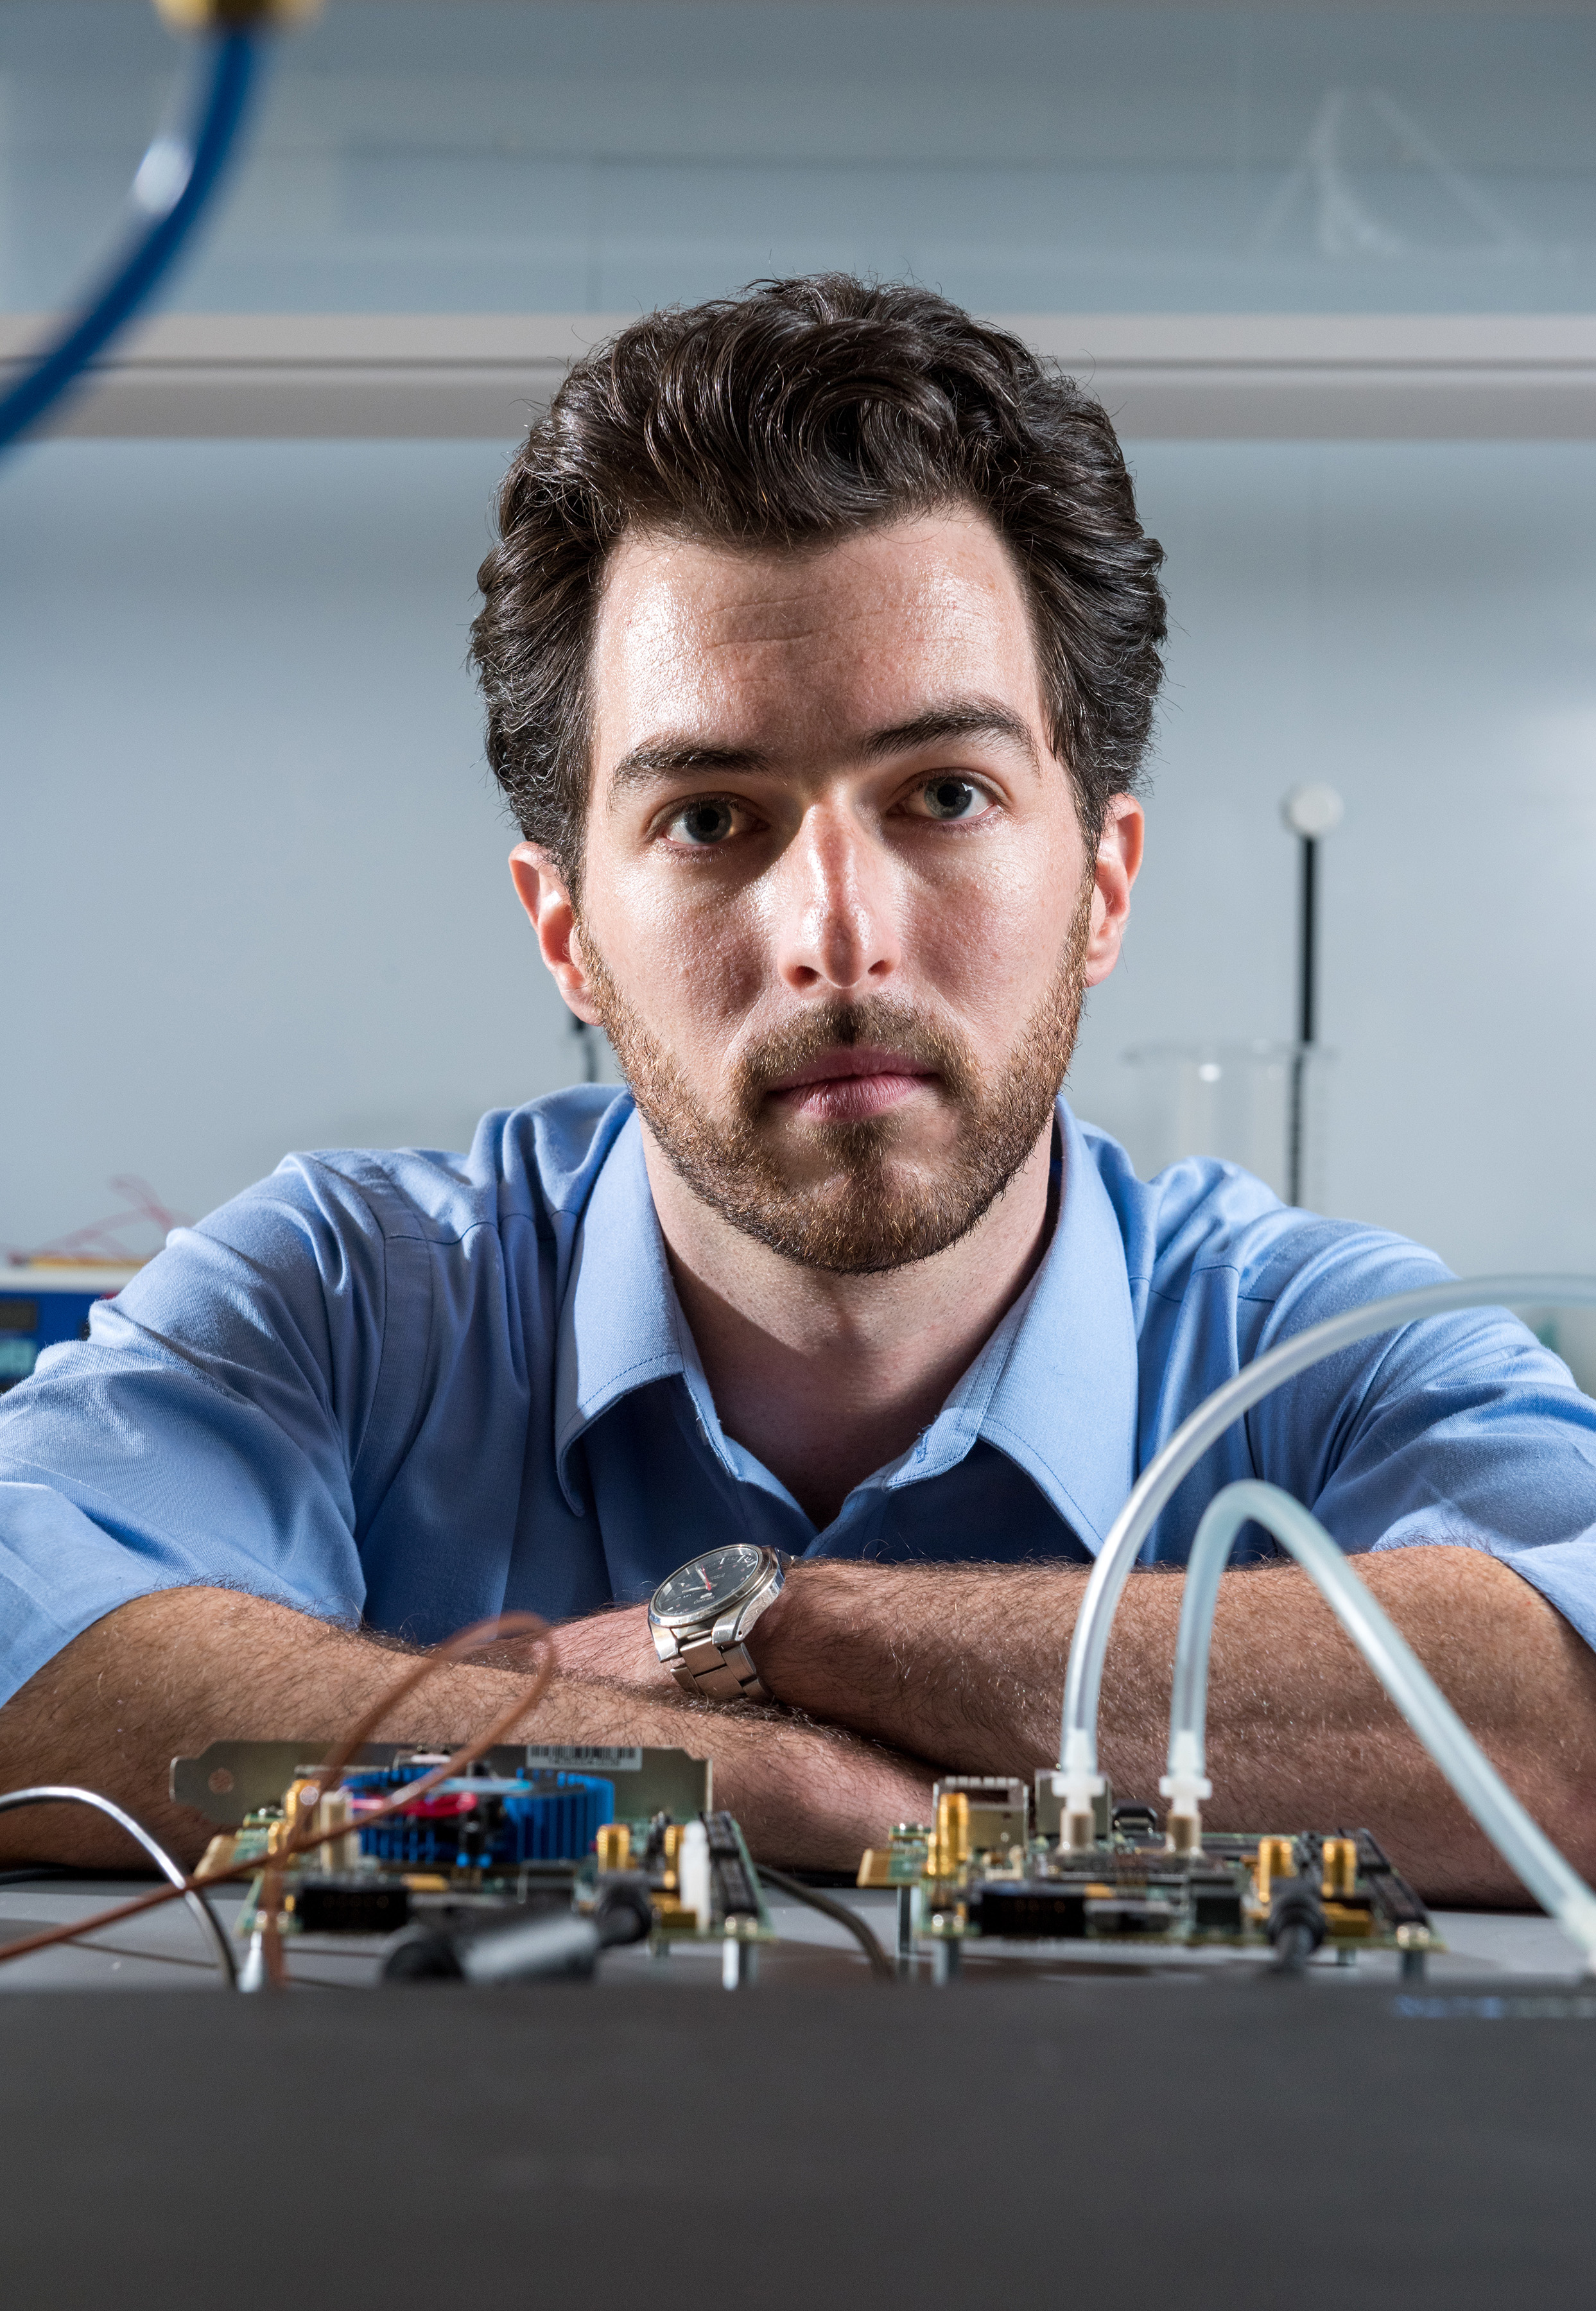 Georgia Tech graduate student Tom Sarvey is shown with test equipment used to compare the performance of stock FPGA devices, one with experimental liquid cooling and the other using stock air cooling. (Credit: Rob Felt, Georgia Tech)